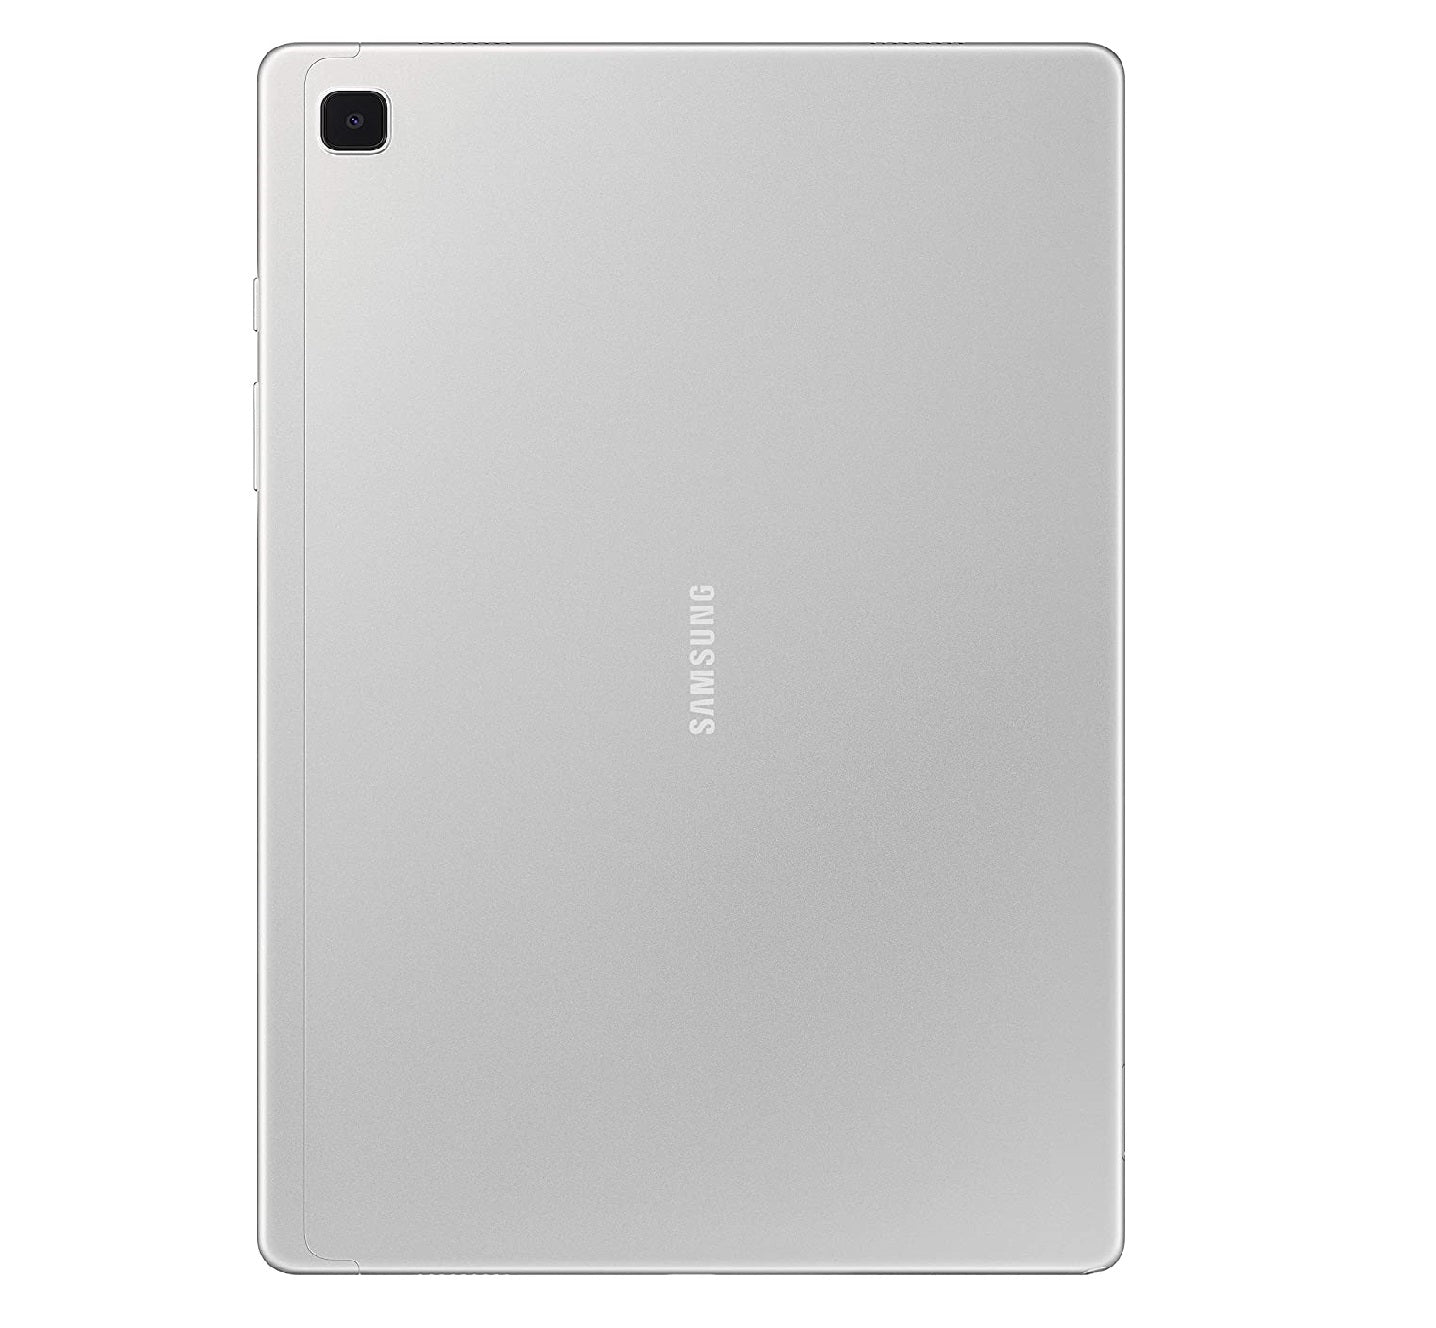 Samsung Tablet A7 LTE T505NZSP(3/32GB, Silver)